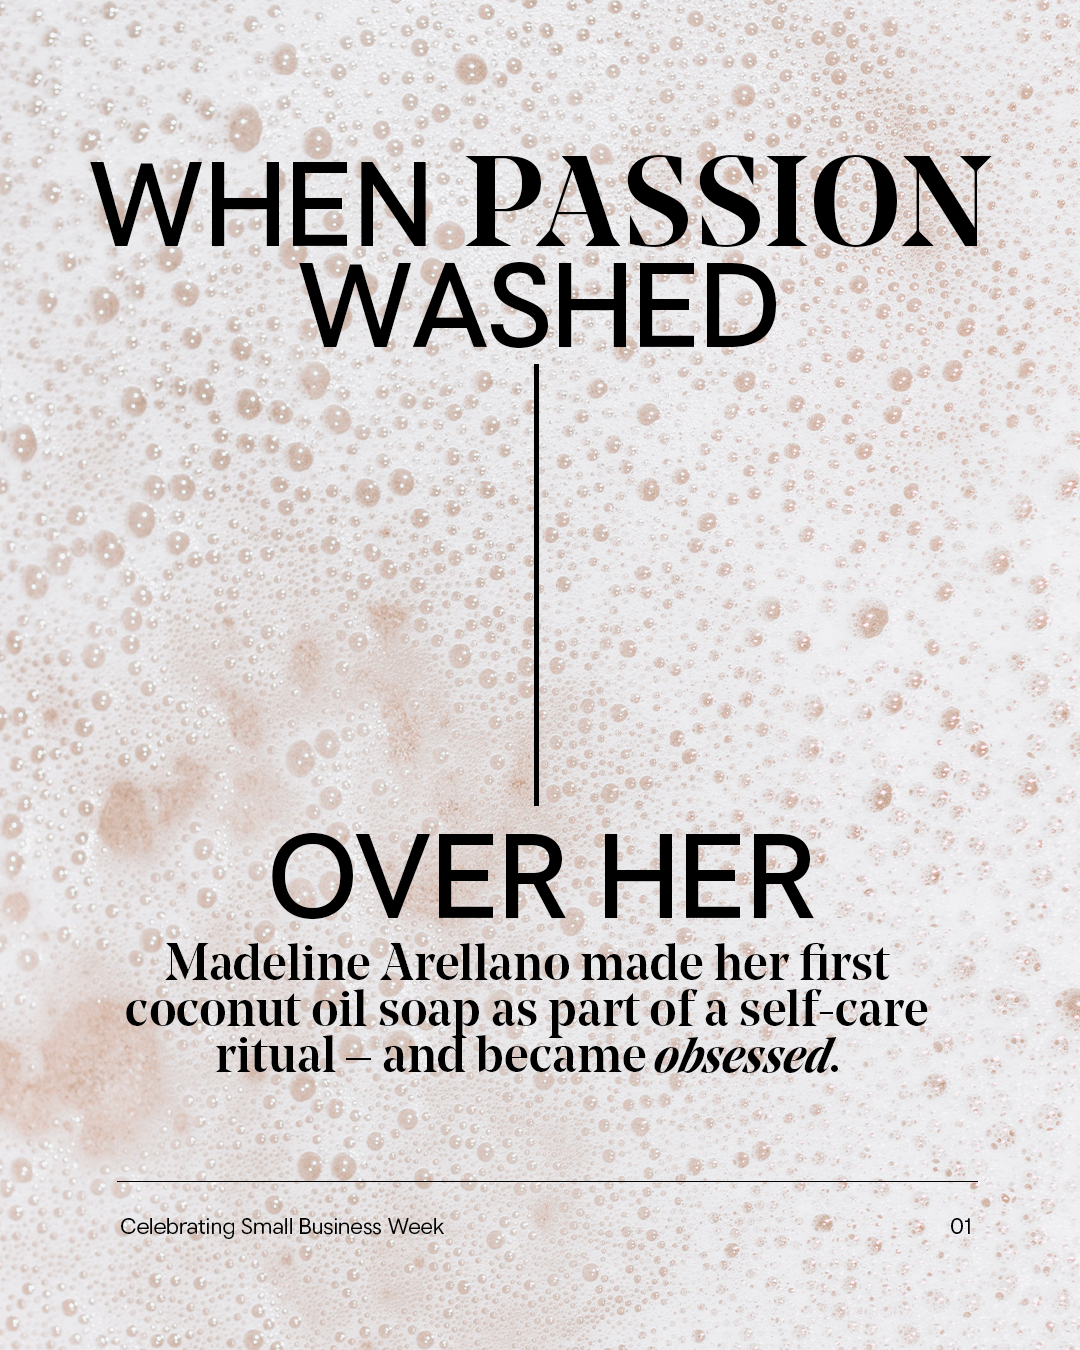 When passion washed over her. Madeline Arellano made her first coconut oil soap.